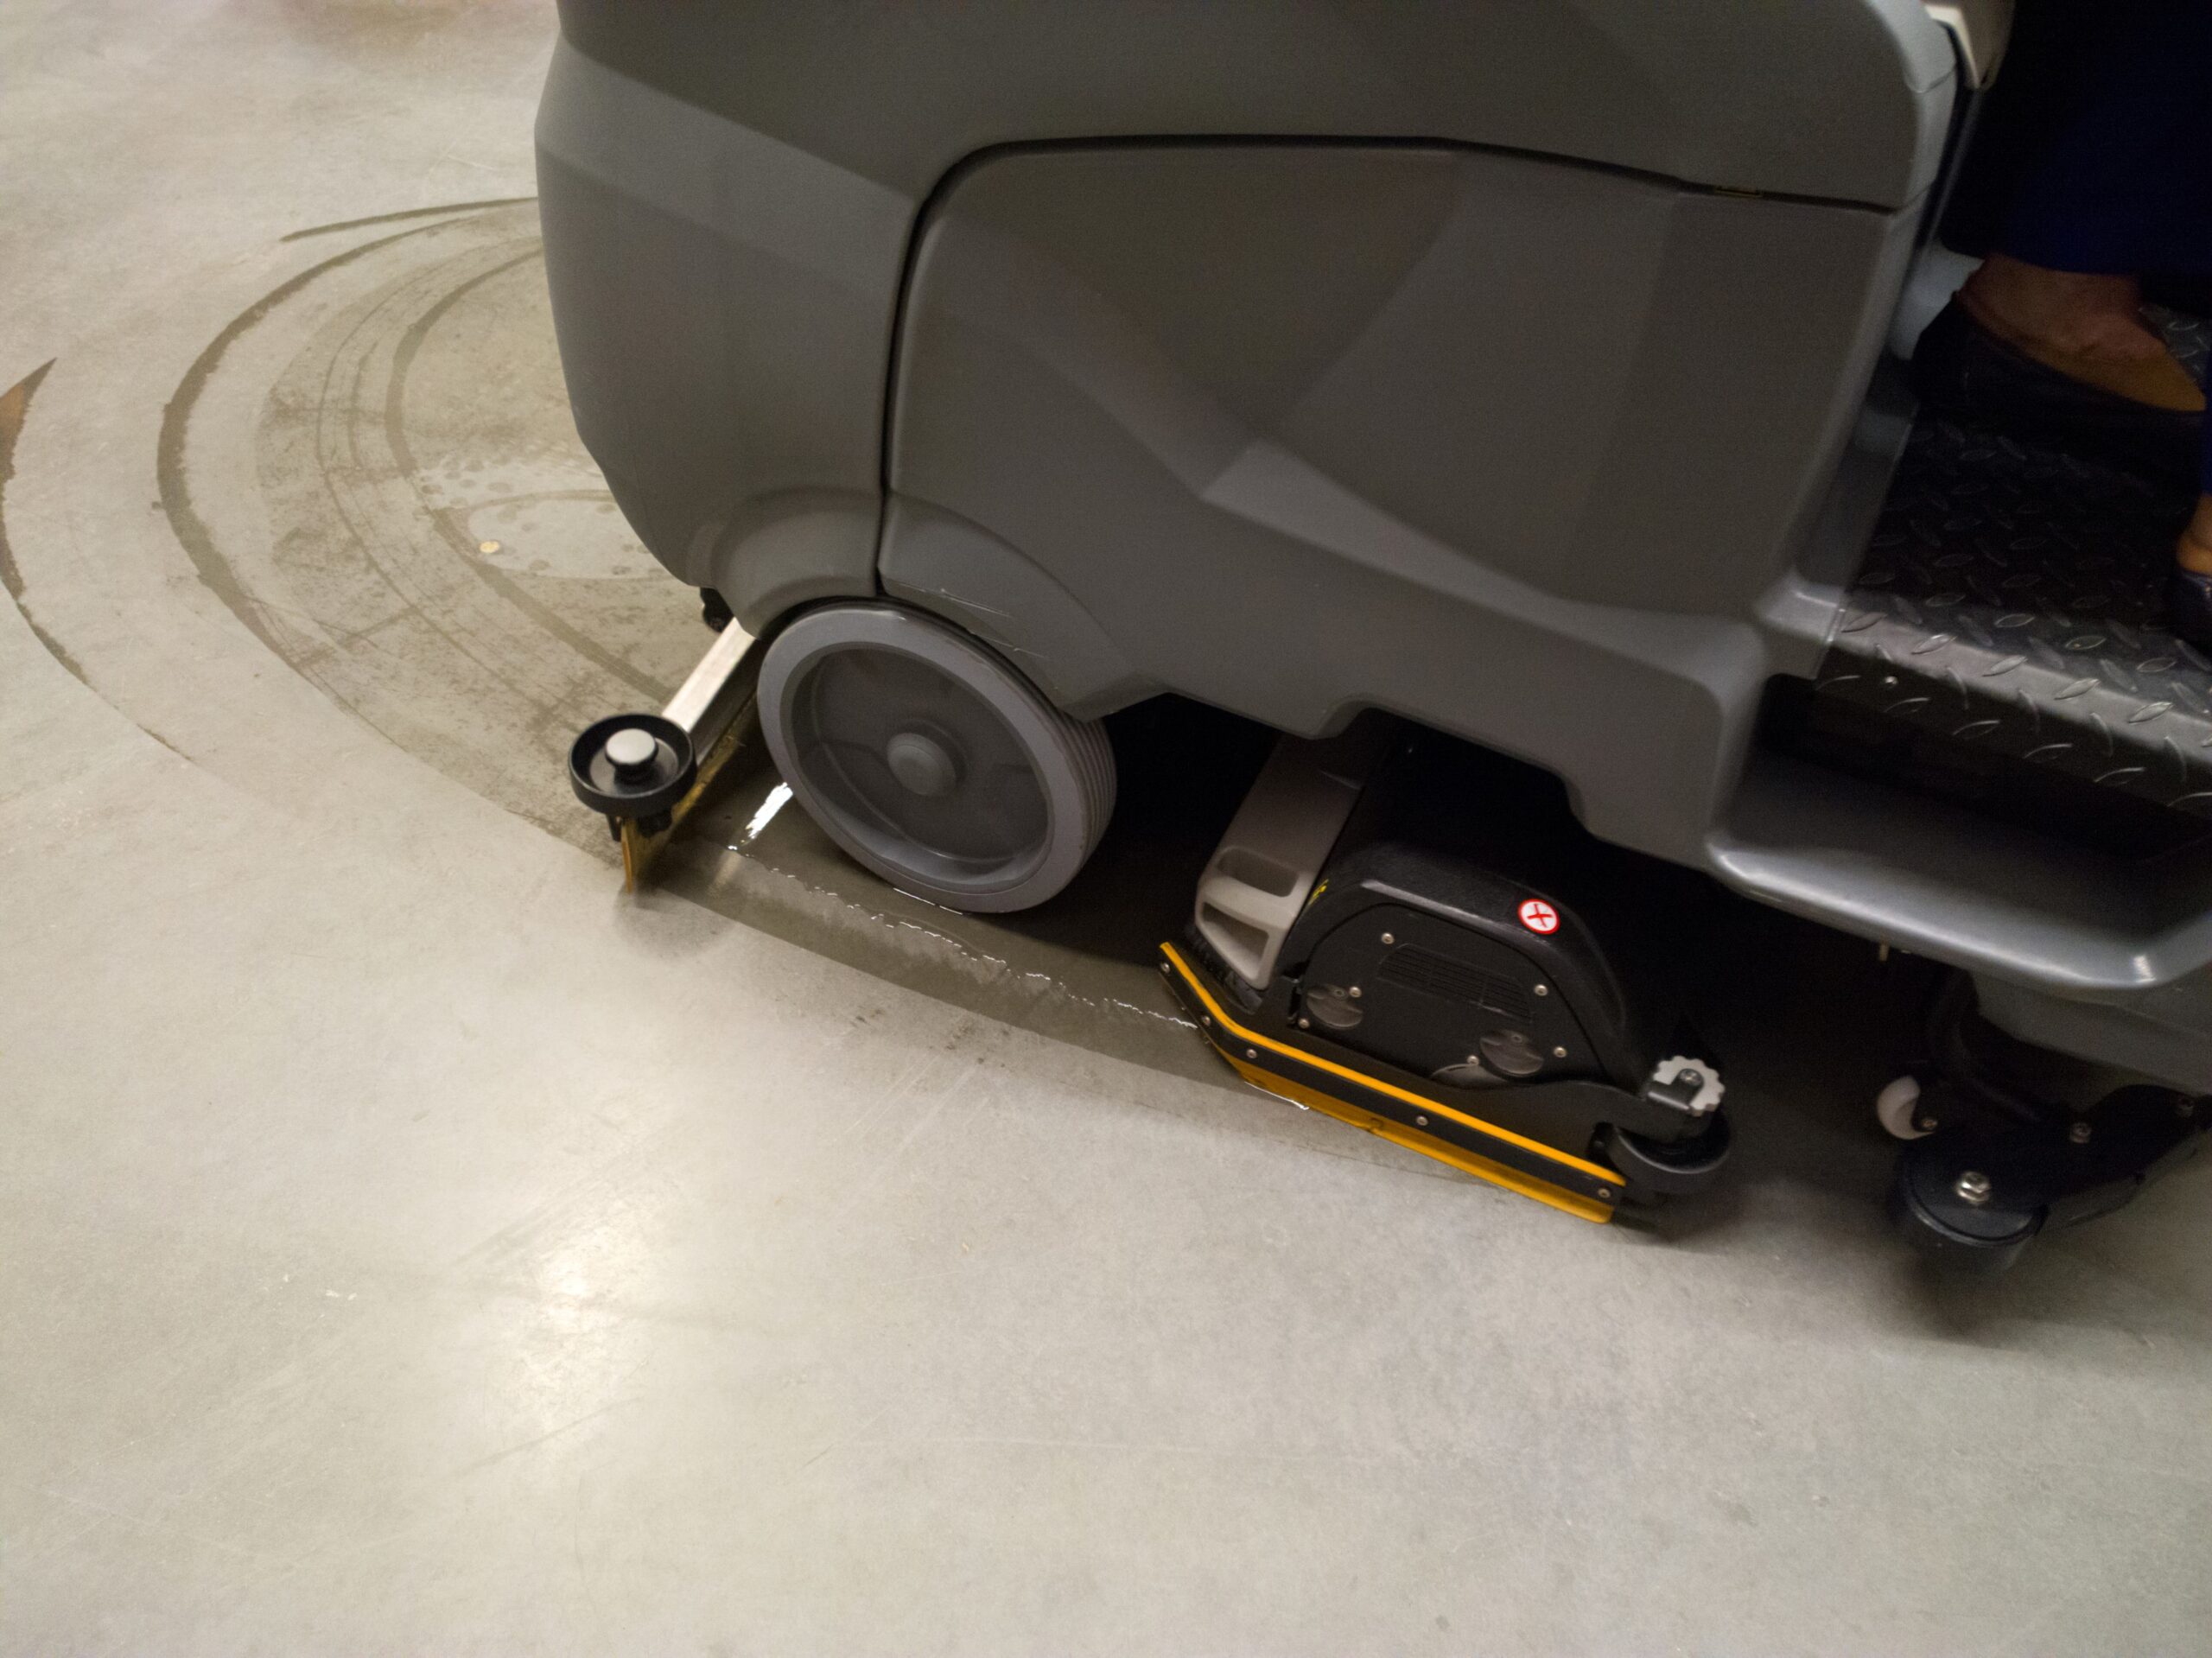 Part of an industrial floor cleaning machine in operation, leaving a wet trail on a concrete floor.